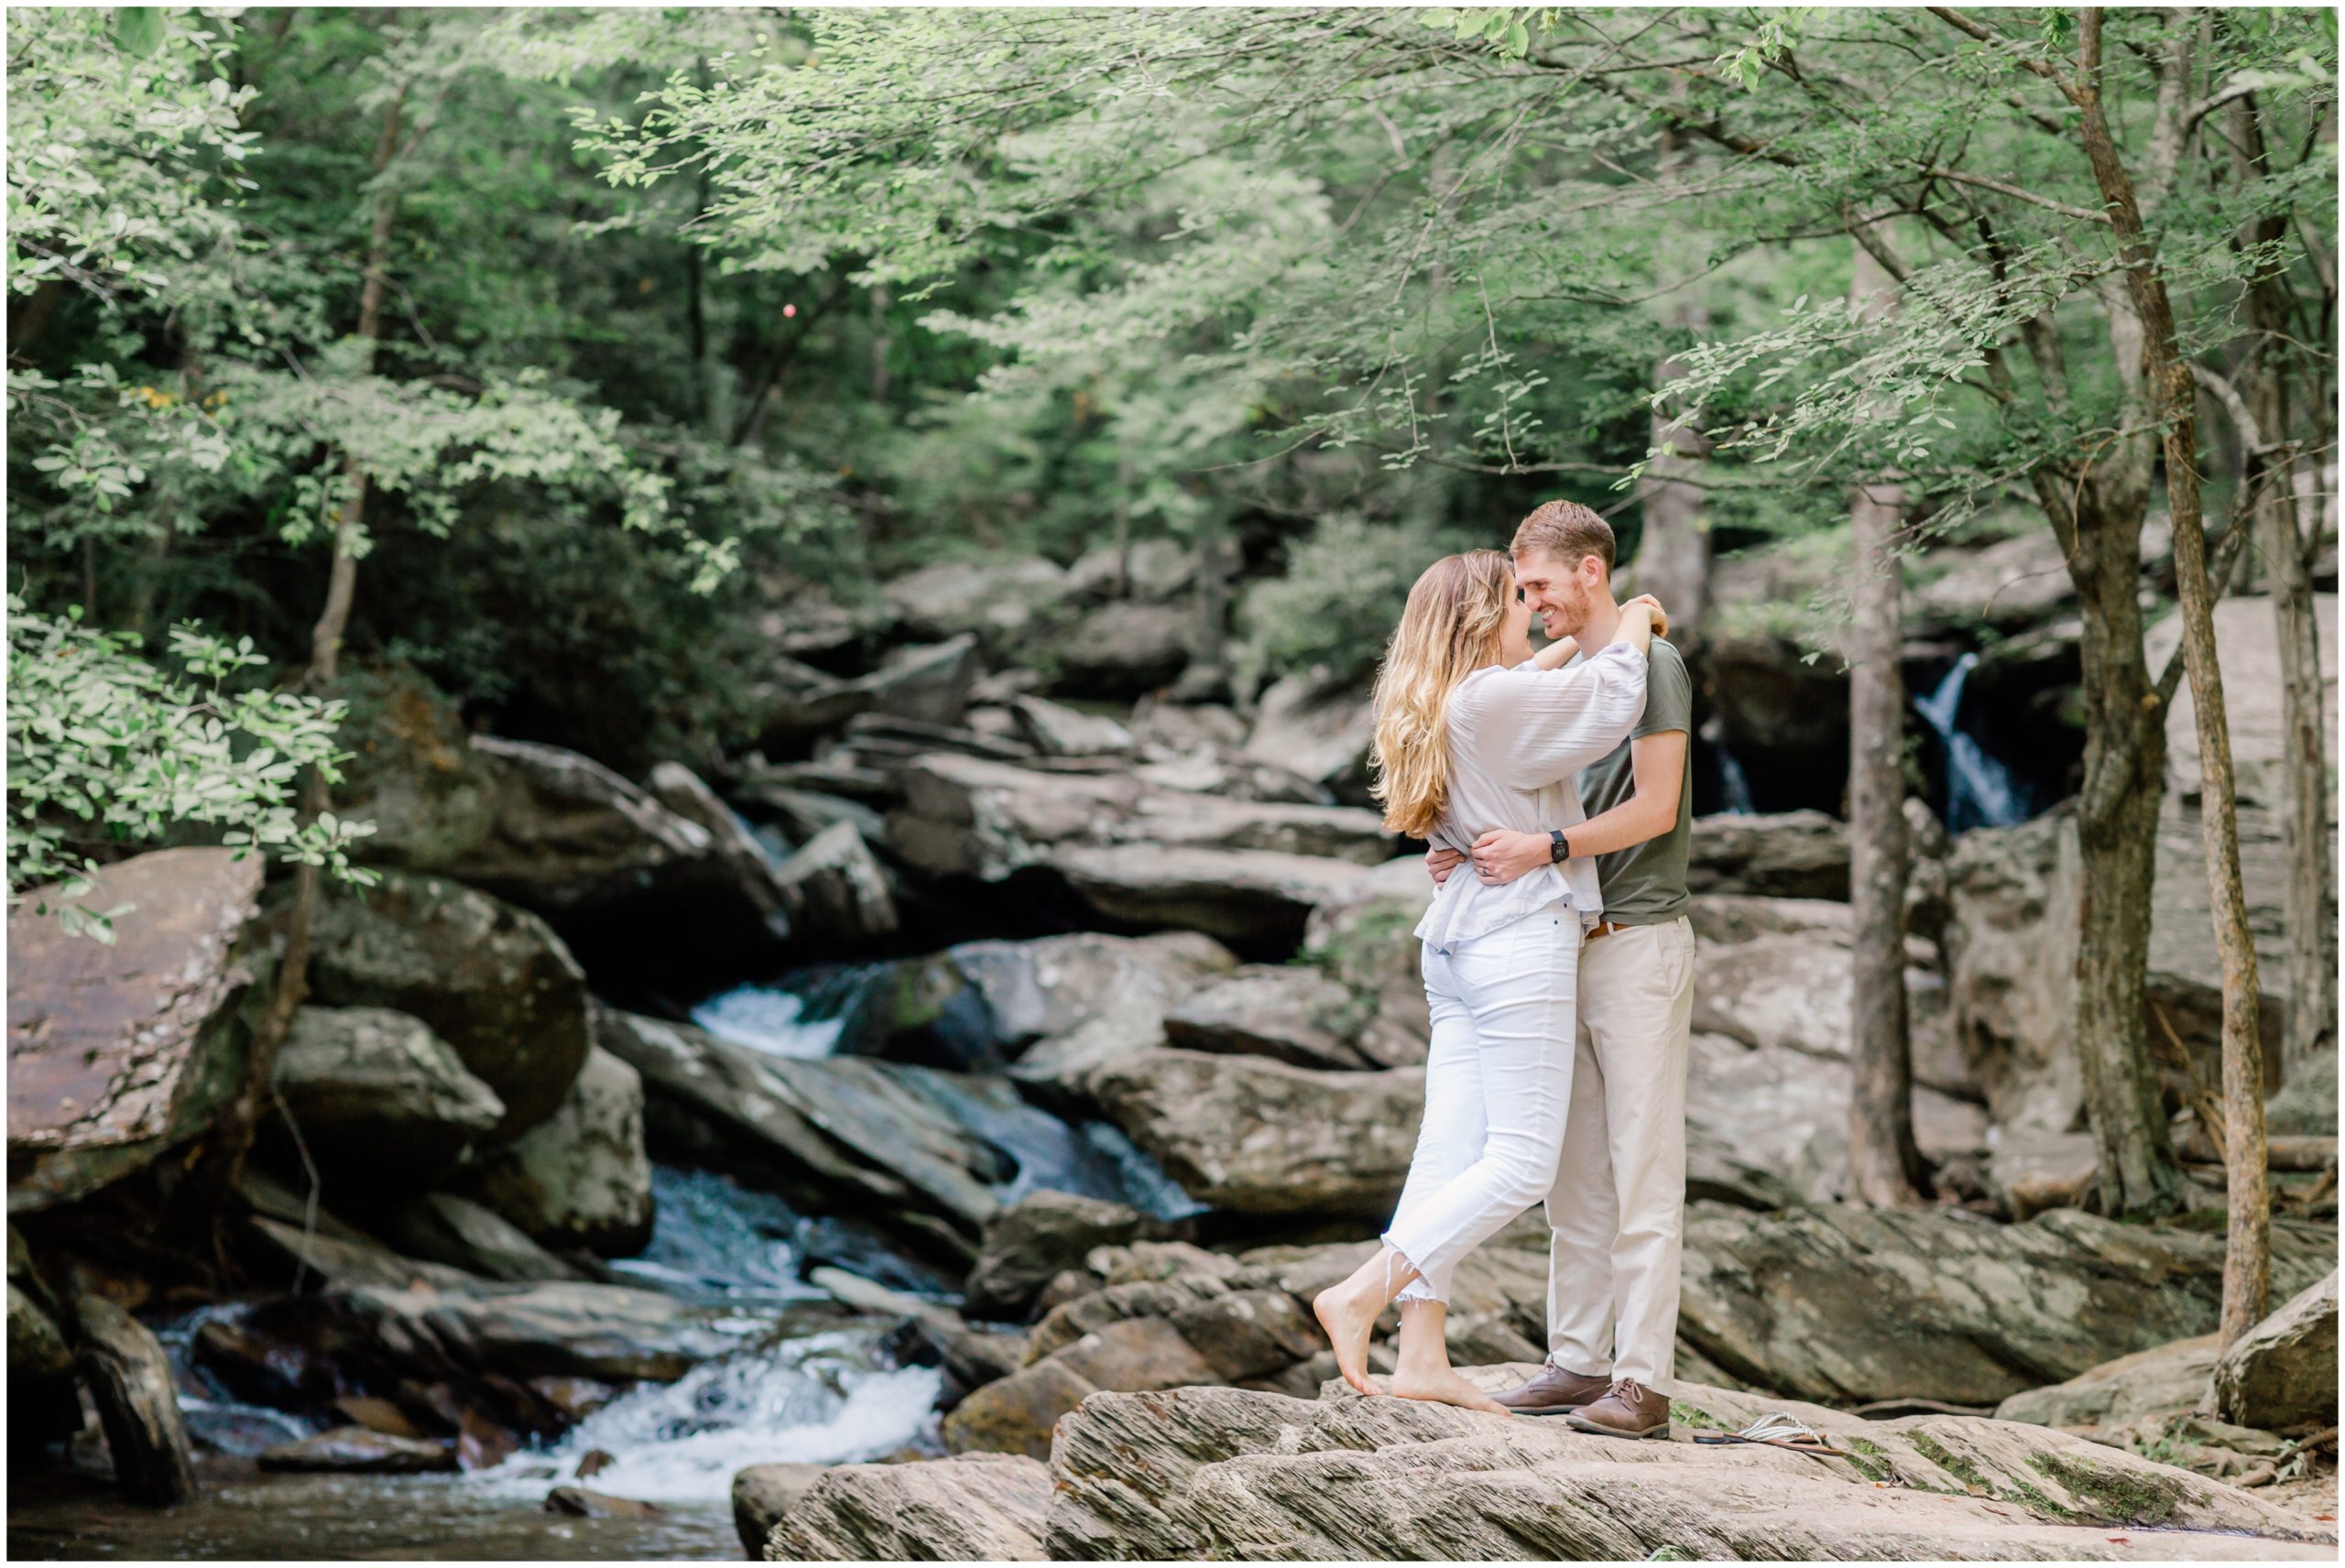 brianna and jonathan lowery's anniversary session on the ocoee river in the cherokee national forest with alyssa rachellephotography